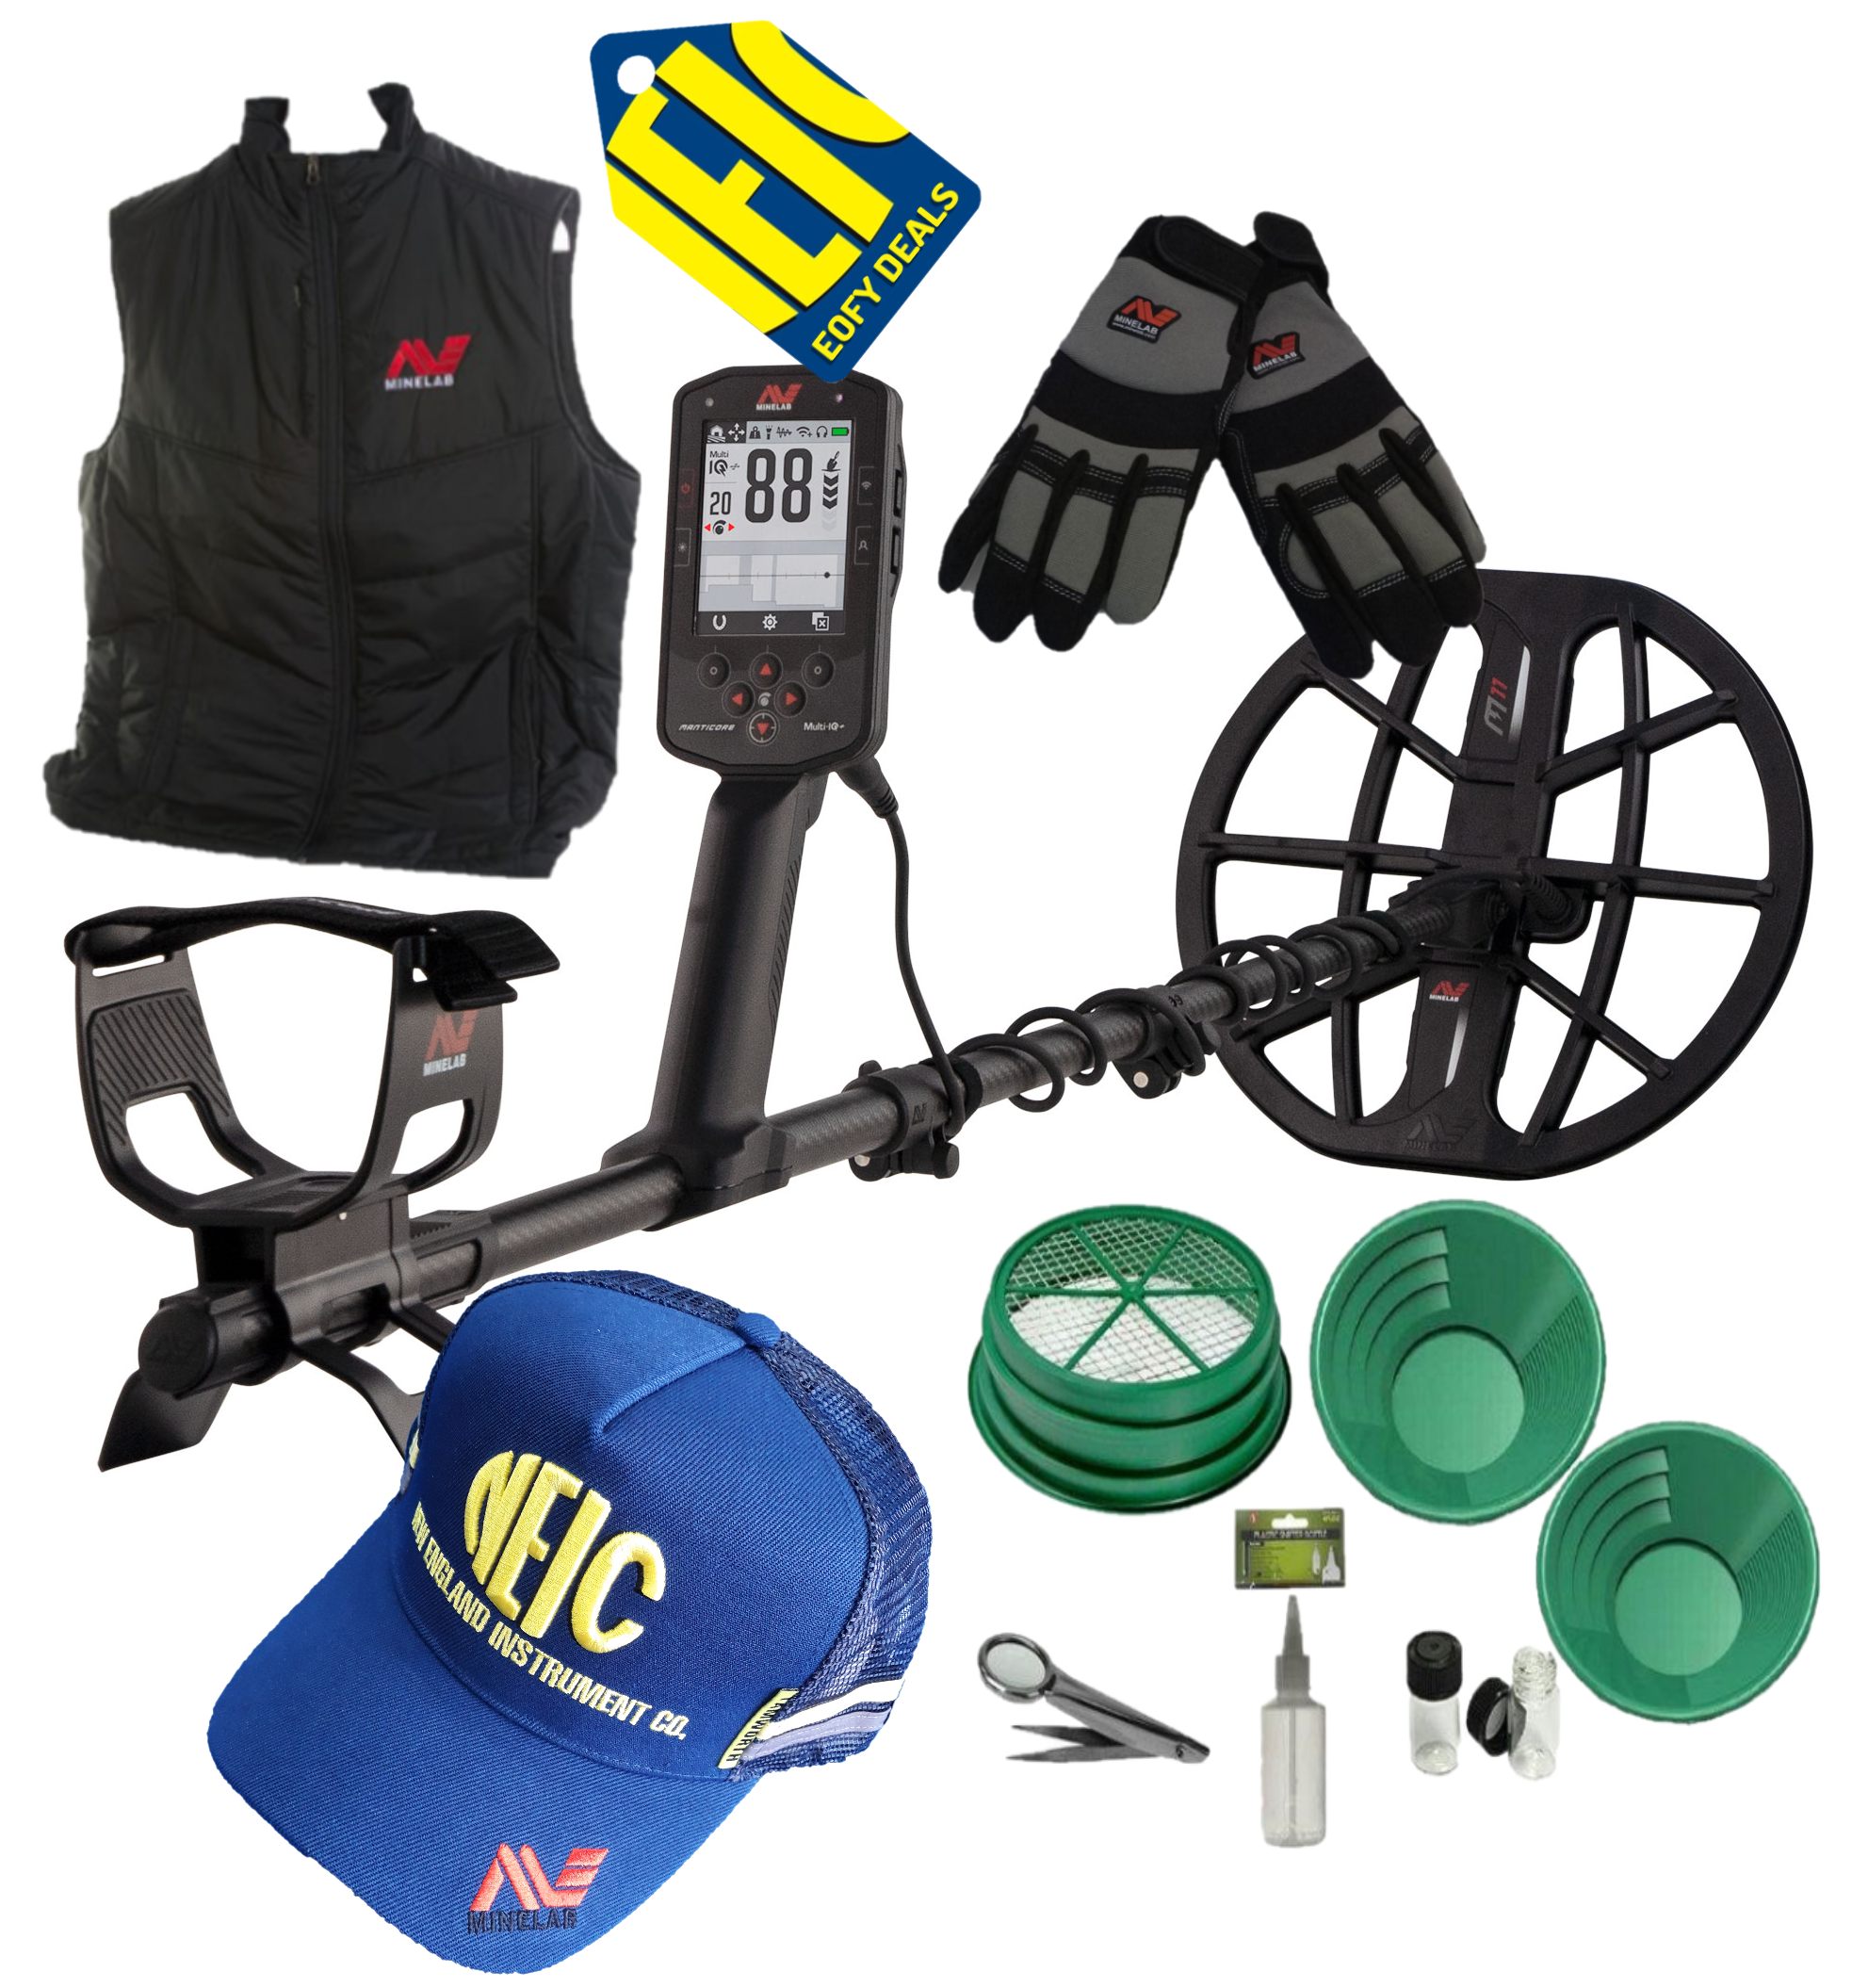 EOFY DEAL – MINELAB MANITCORE Detector + Minelab Puffer Vest & Digging Gloves + NEIC Cap + 7pc Panning Kit